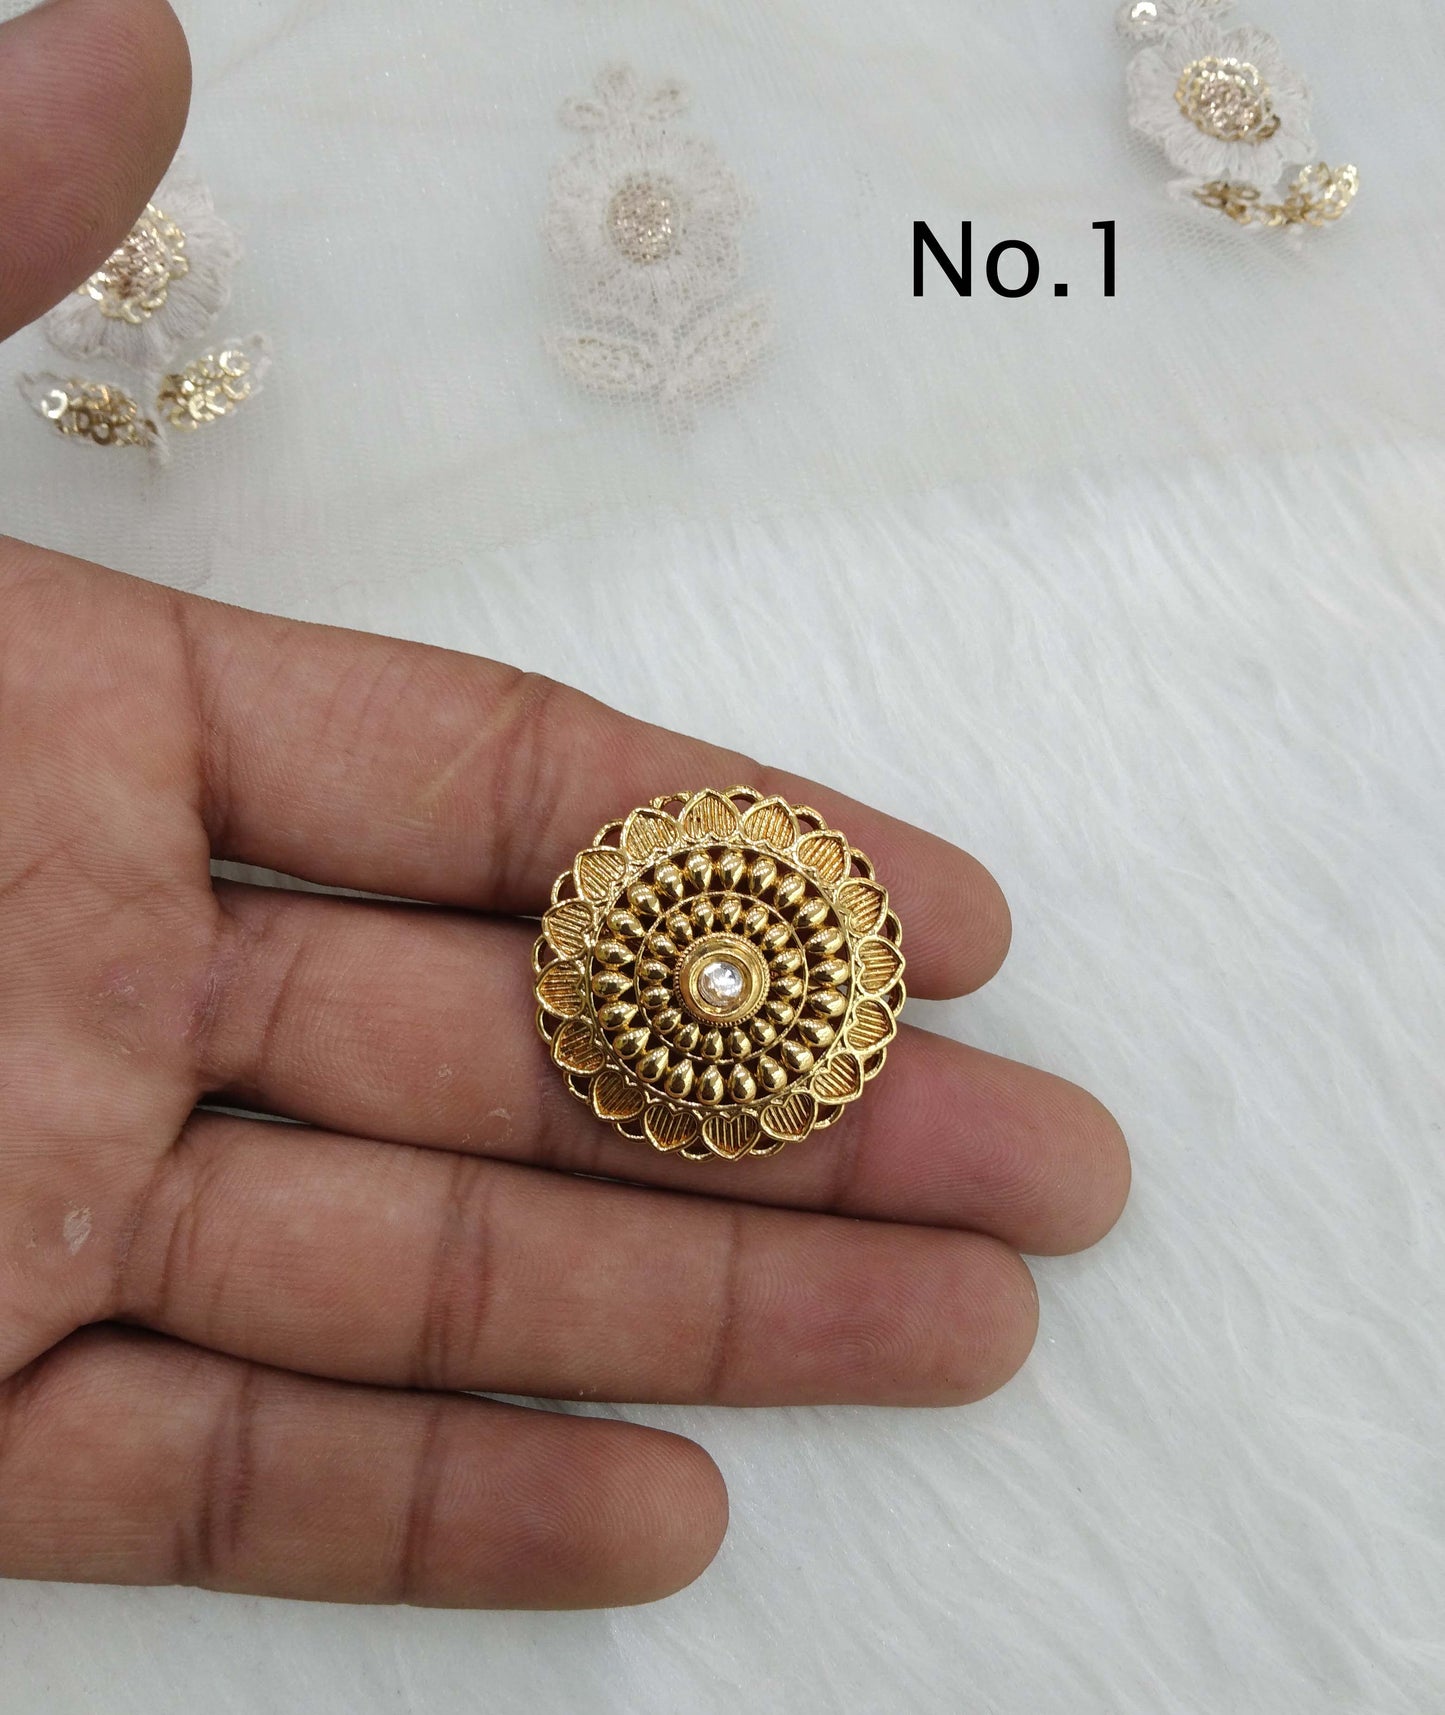 Indian Ring /gold finish Finger rings round bridal ring hand accessory/hki